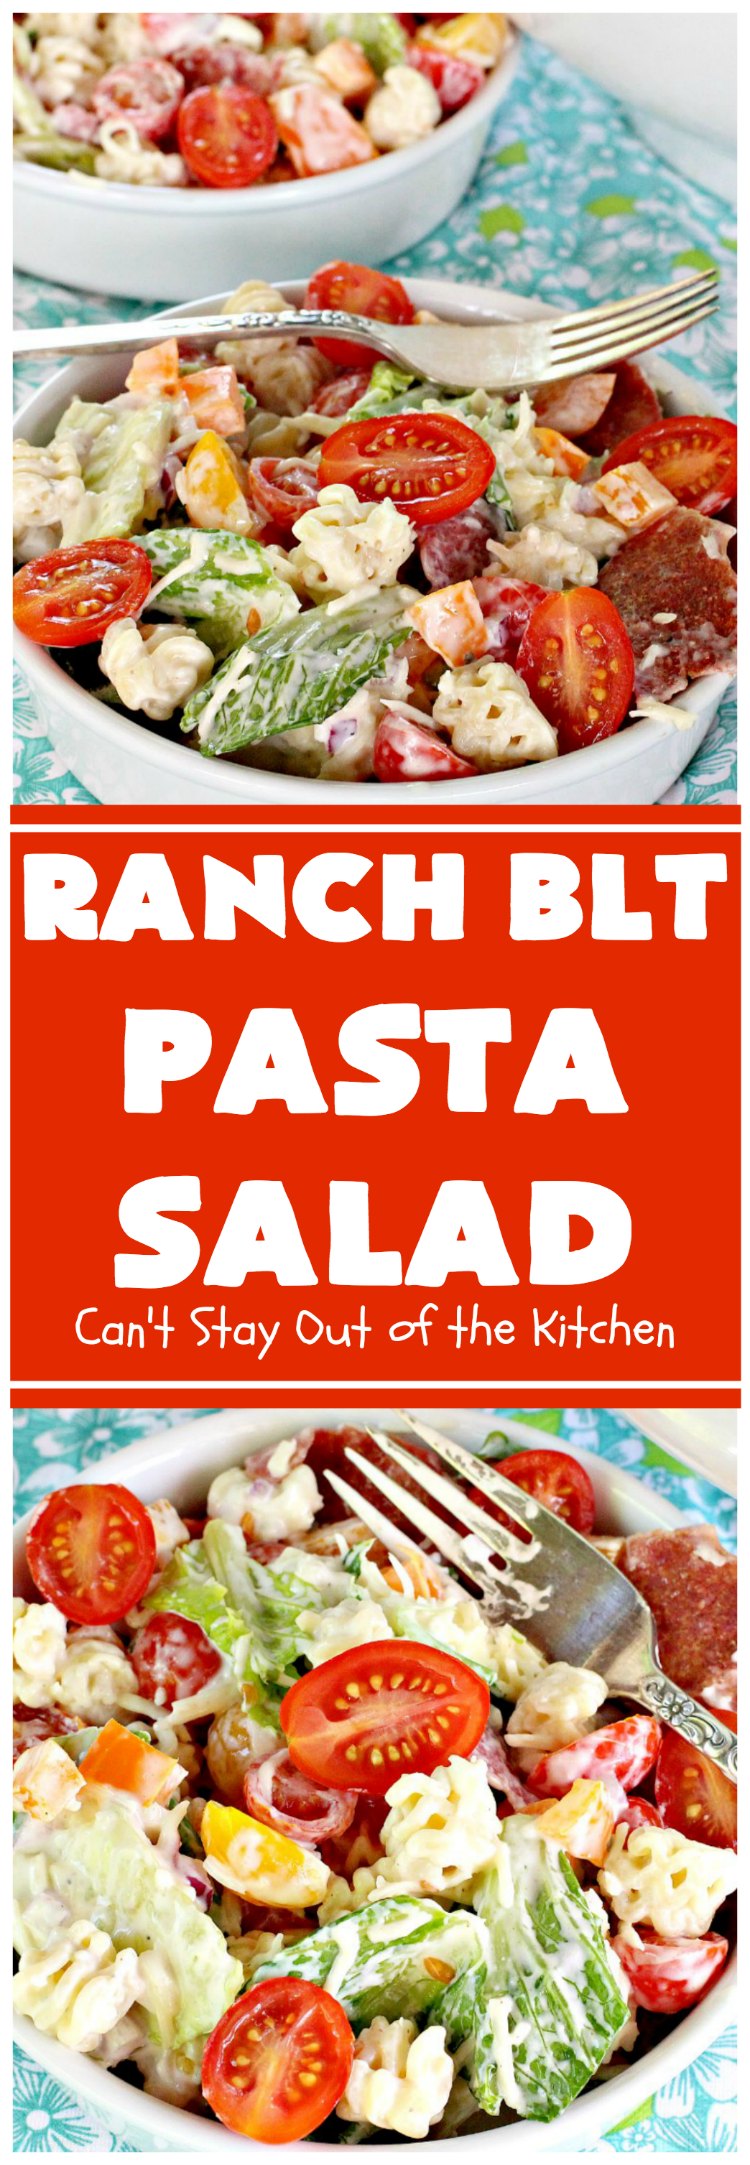 Ranch BLT Pasta Salad | Can't Stay Out of the Kitchen | awesome #pasta #salad with #ranchdressing. I used #turkey #bacon. Great for summer #holidays, potlucks or backyard #BBQs. 